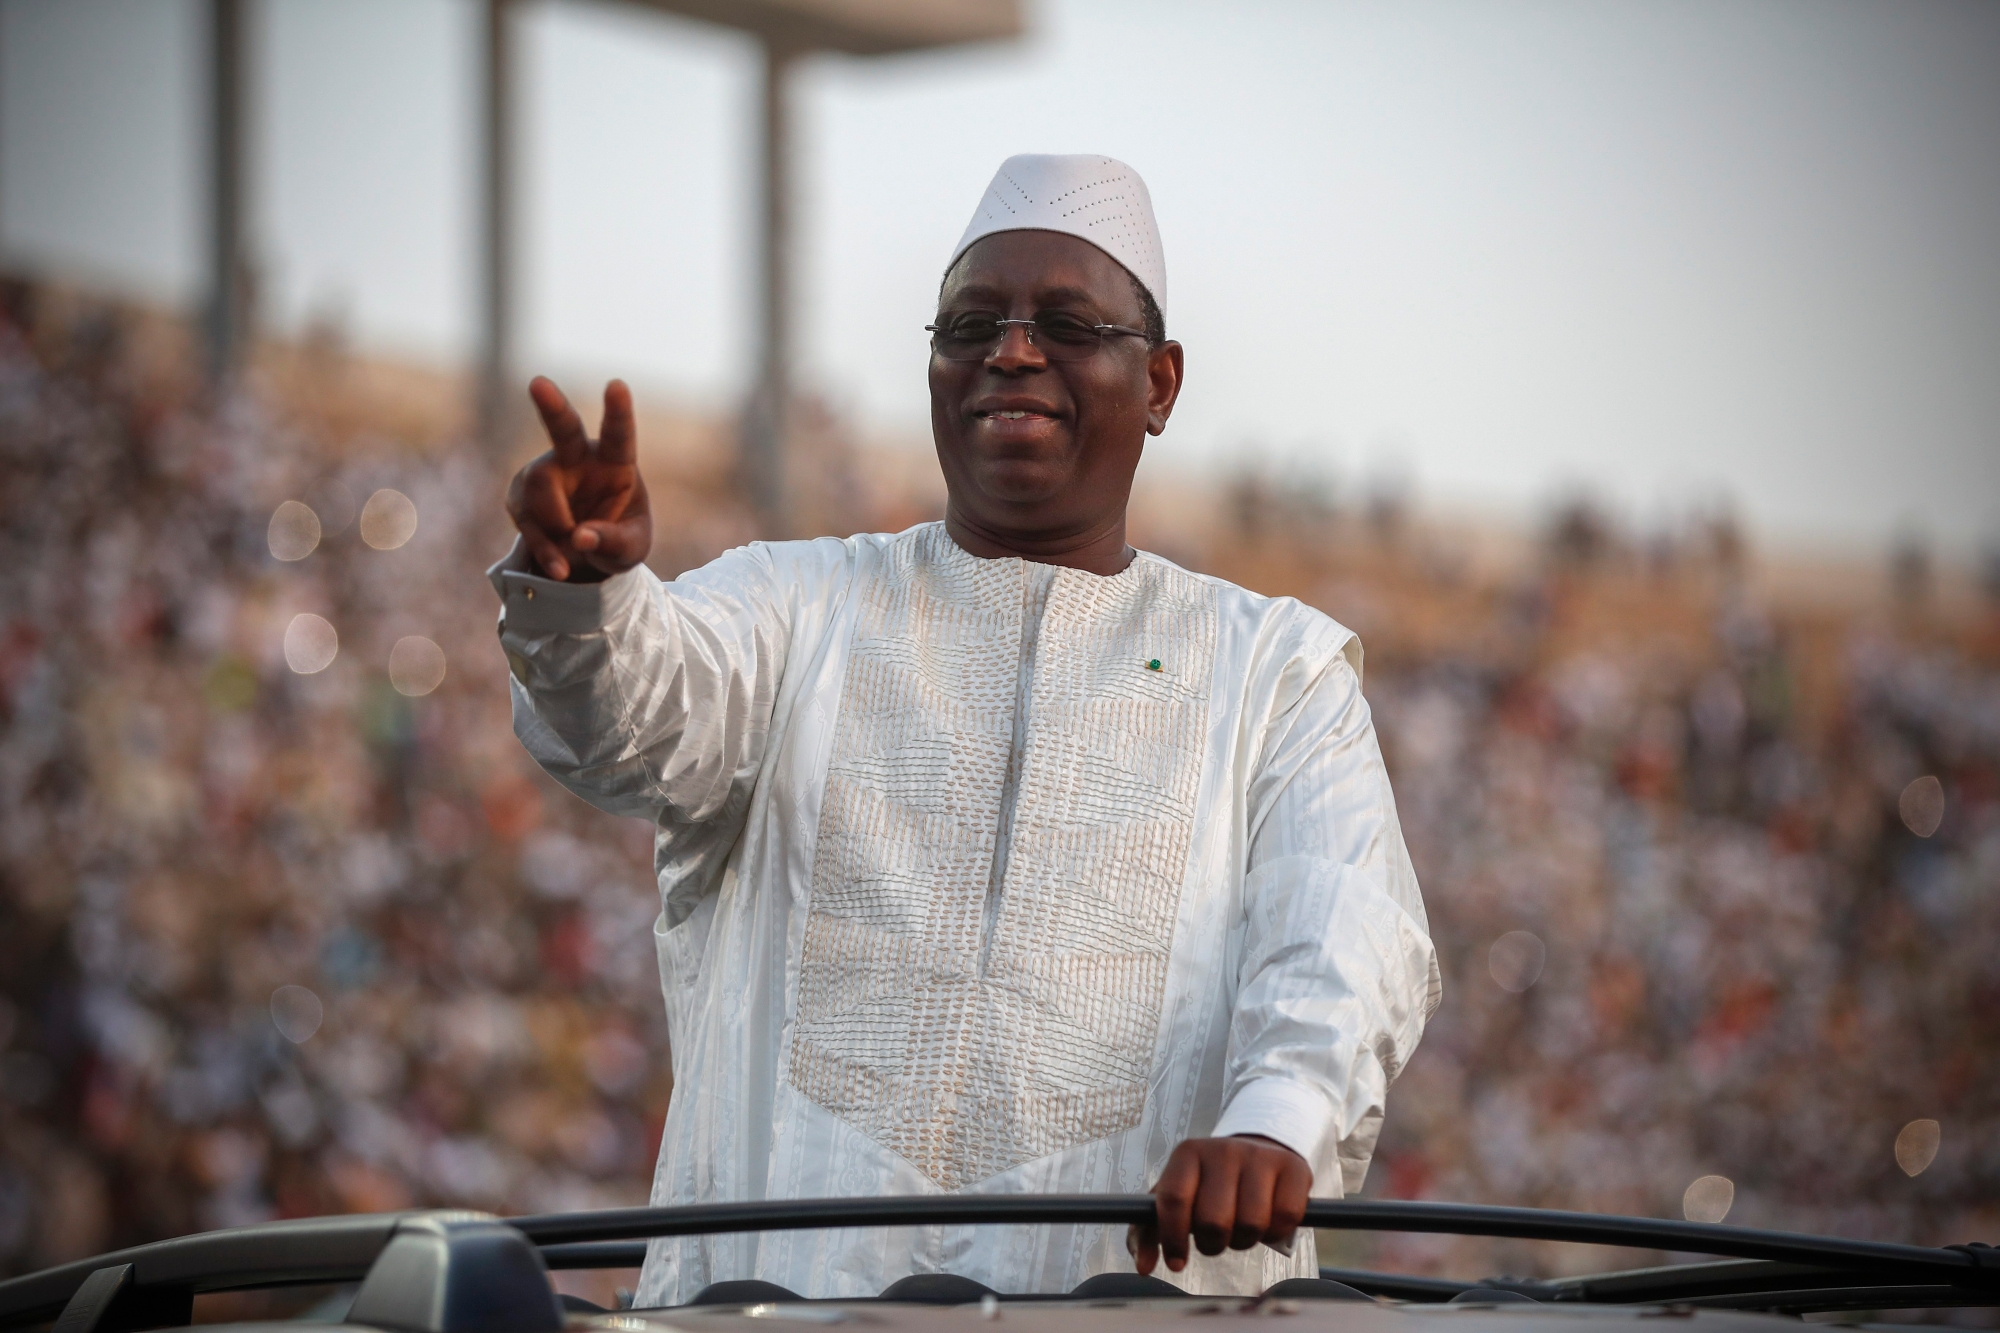 epa07388683 Senegal, incumbent President Macky Sall greets a cheering crowd as he arrives for the last campaign rally in Dakar, Senegal, 22 February 2019. Presidential elections will be held in Senegal on 24 February 2019. The vote will be the 11th straight presidential election since Senegal gained independence from France in 1960. Incumbent President Macky Sall is amongst five candidates for the presidency.  EPA/NIC BOTHMA SENEGAL PRESIDENTIAL ELECTIONS